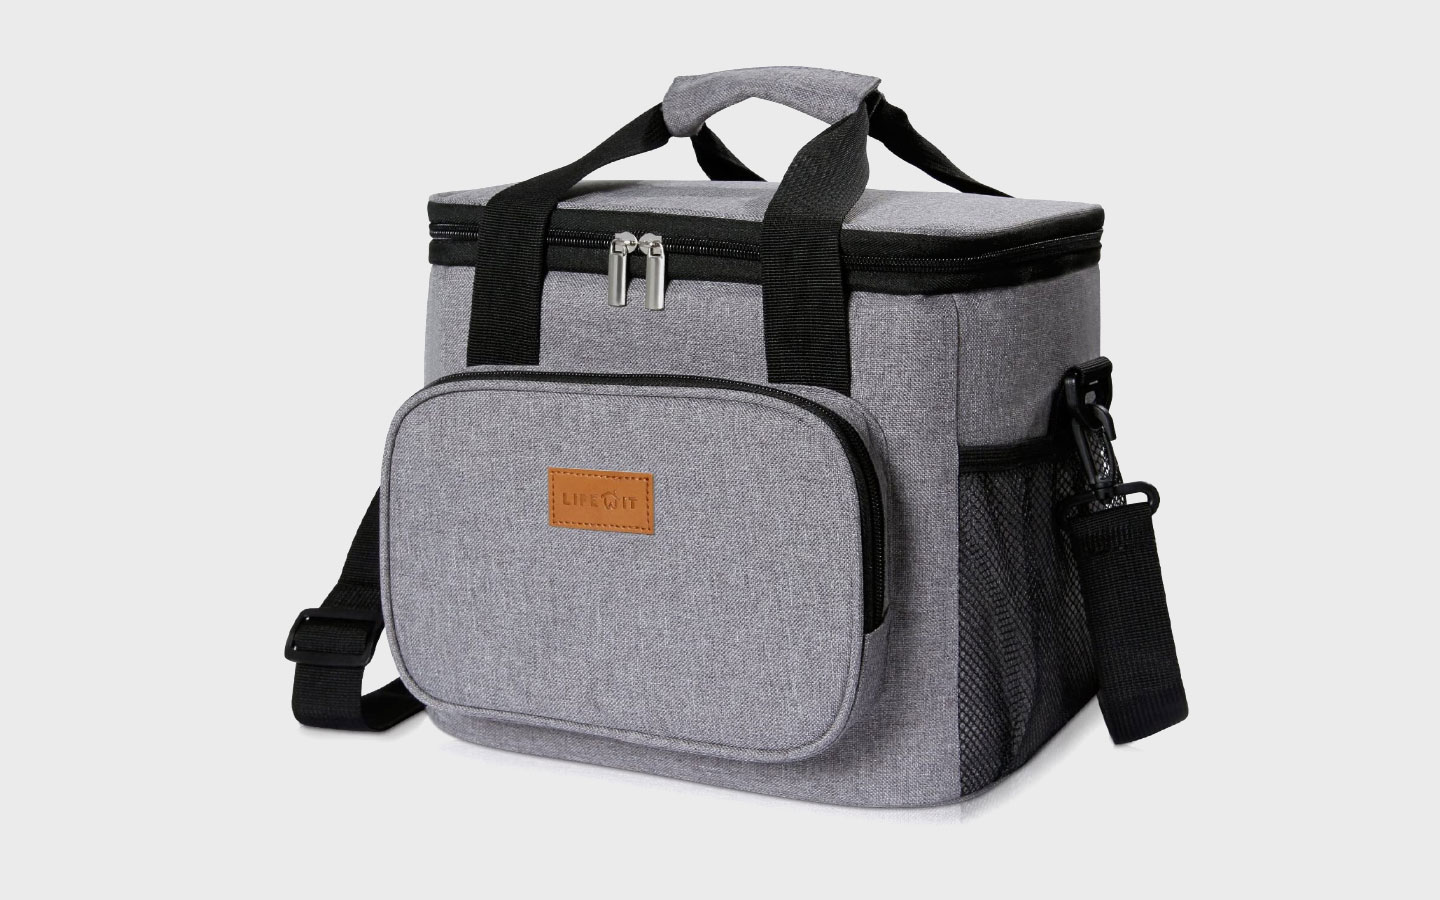 must have vanlife items insulated cooler bag